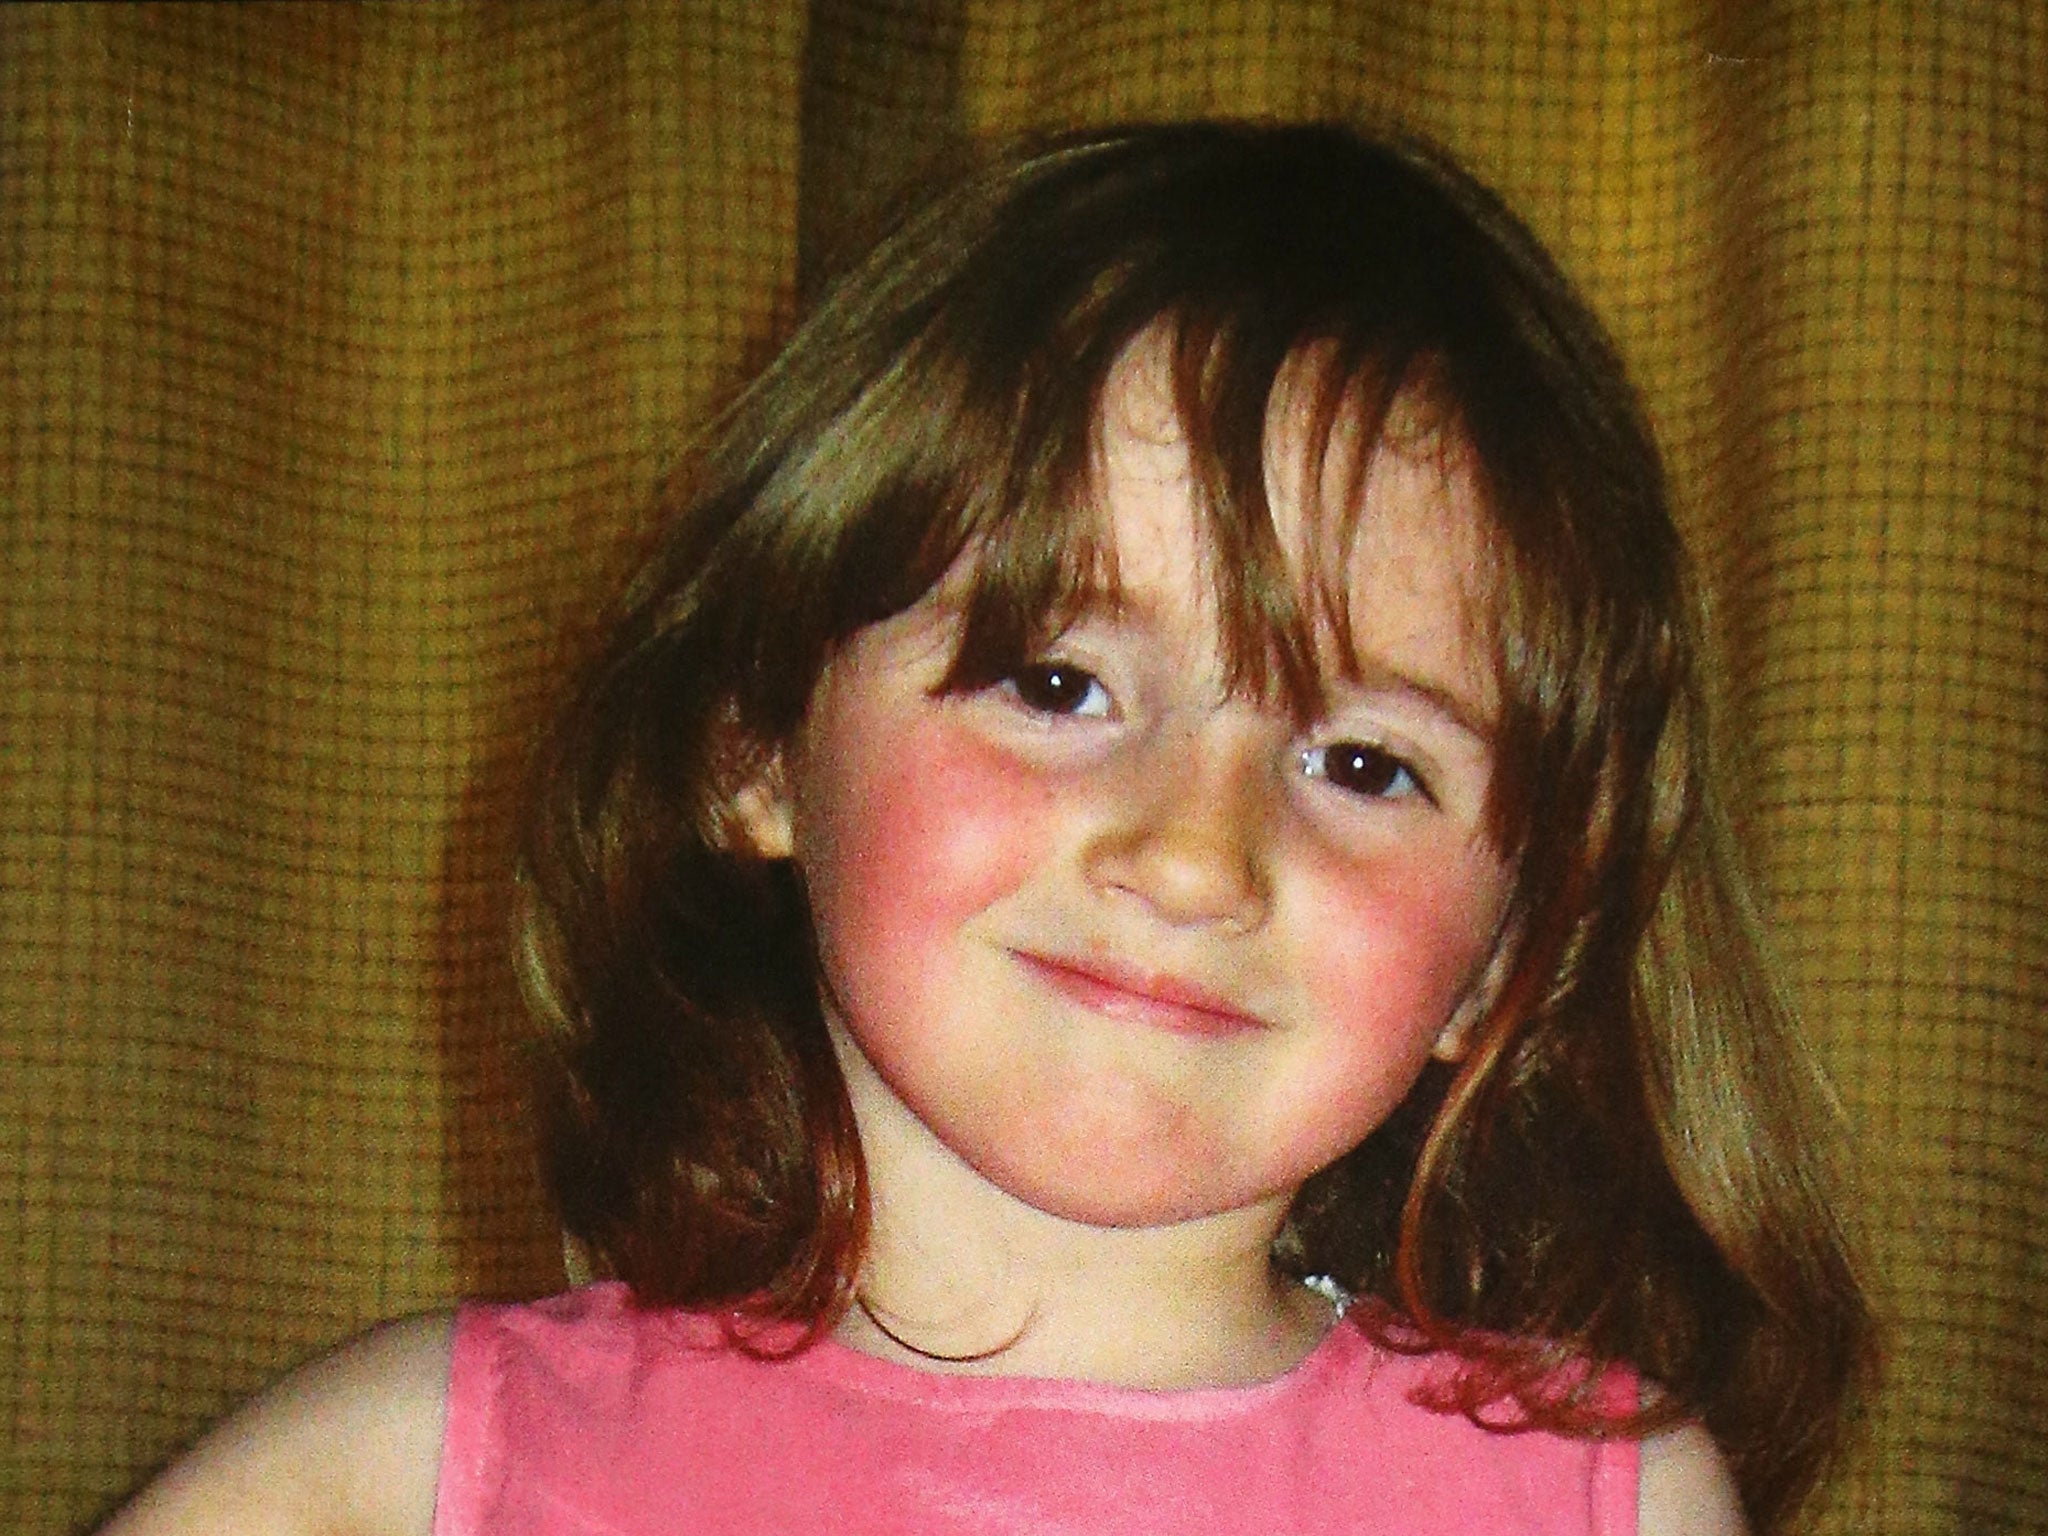 April Jones was abducted and killed by Mark Bridger in October 2012